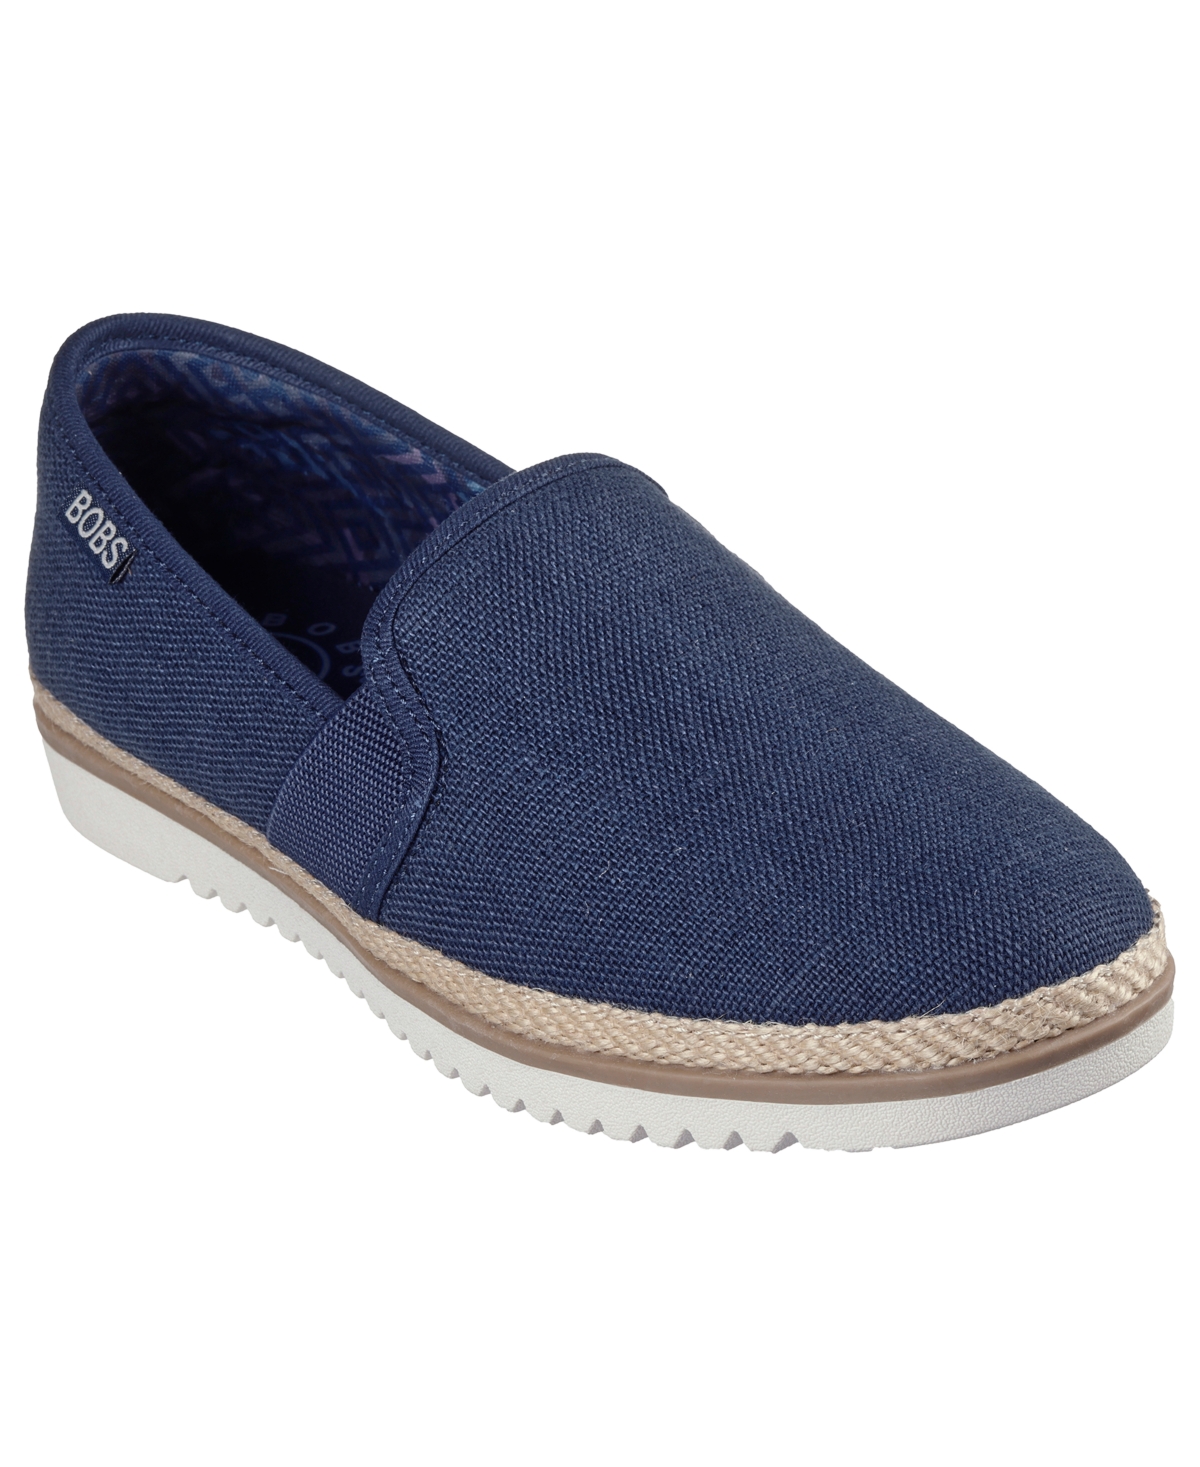 Women's Flexpadrille Lo Slip-On Casual Sneakers from Finish Line - Navy